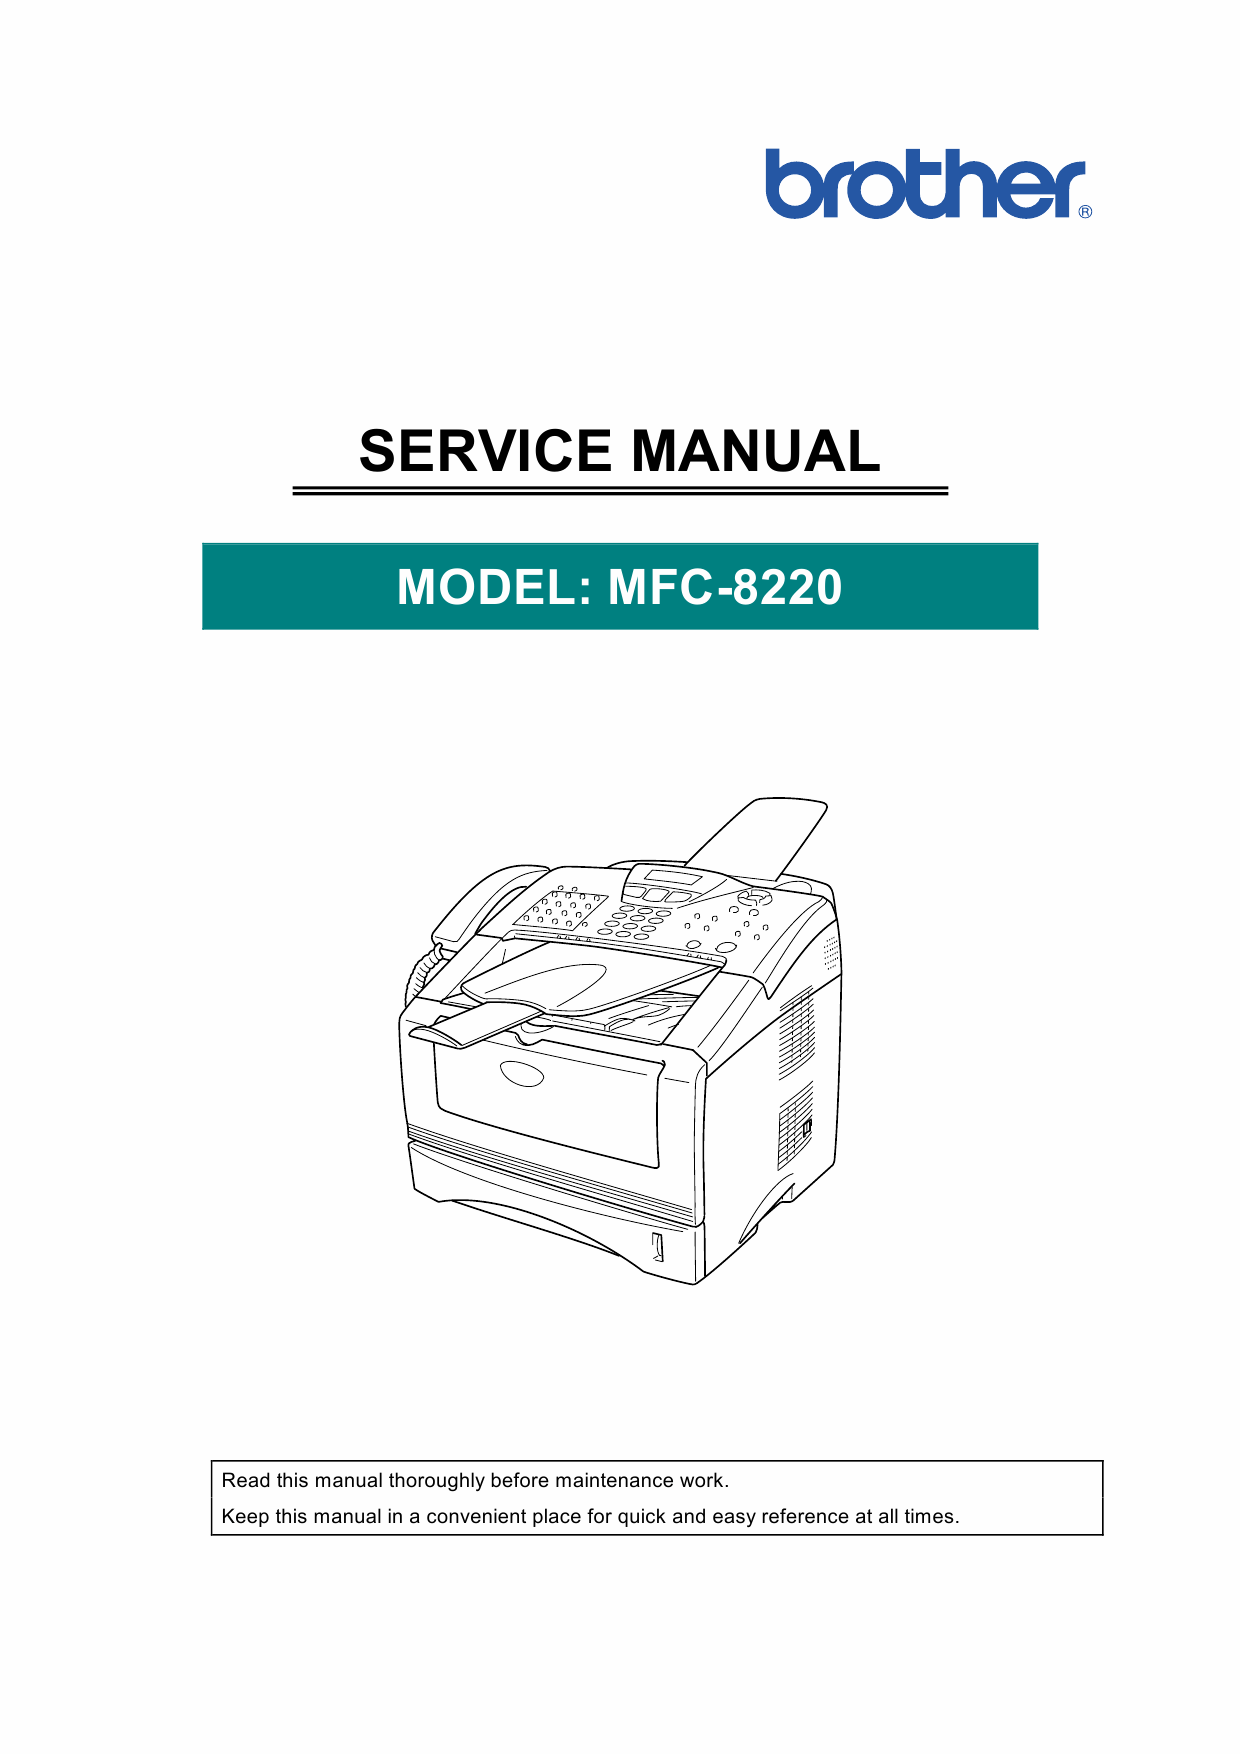 Brother MFC 8220 Service Manual and Parts-1